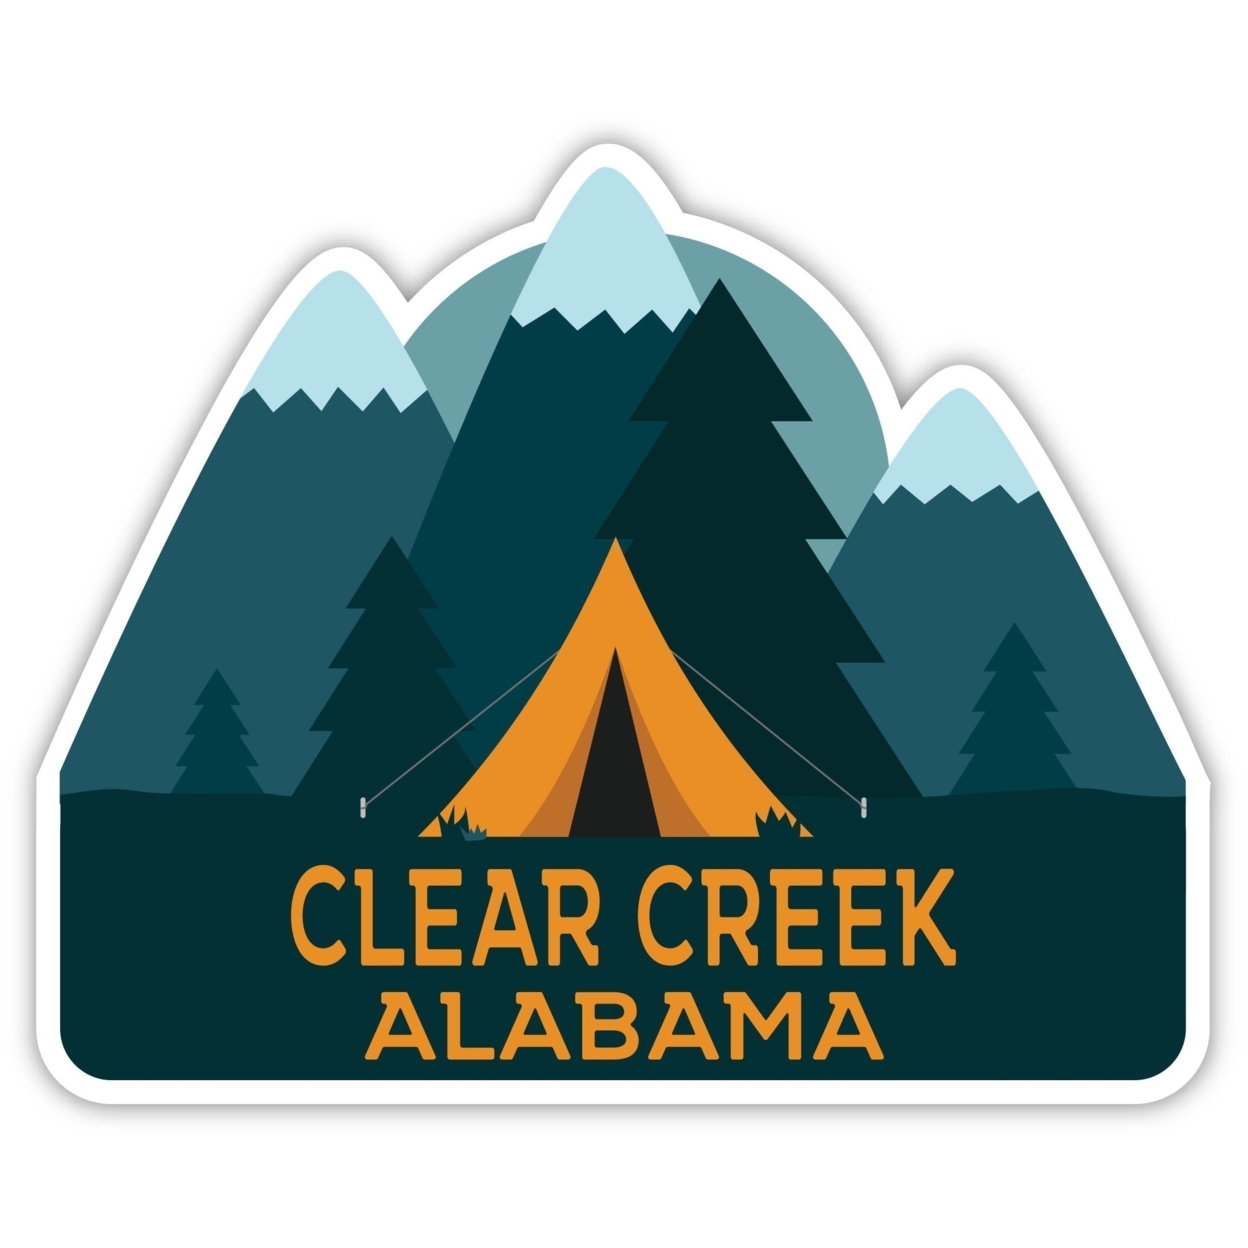 Clear Creek Alabama Souvenir Decorative Stickers (Choose Theme And Size) - 4-Pack, 2-Inch, Tent